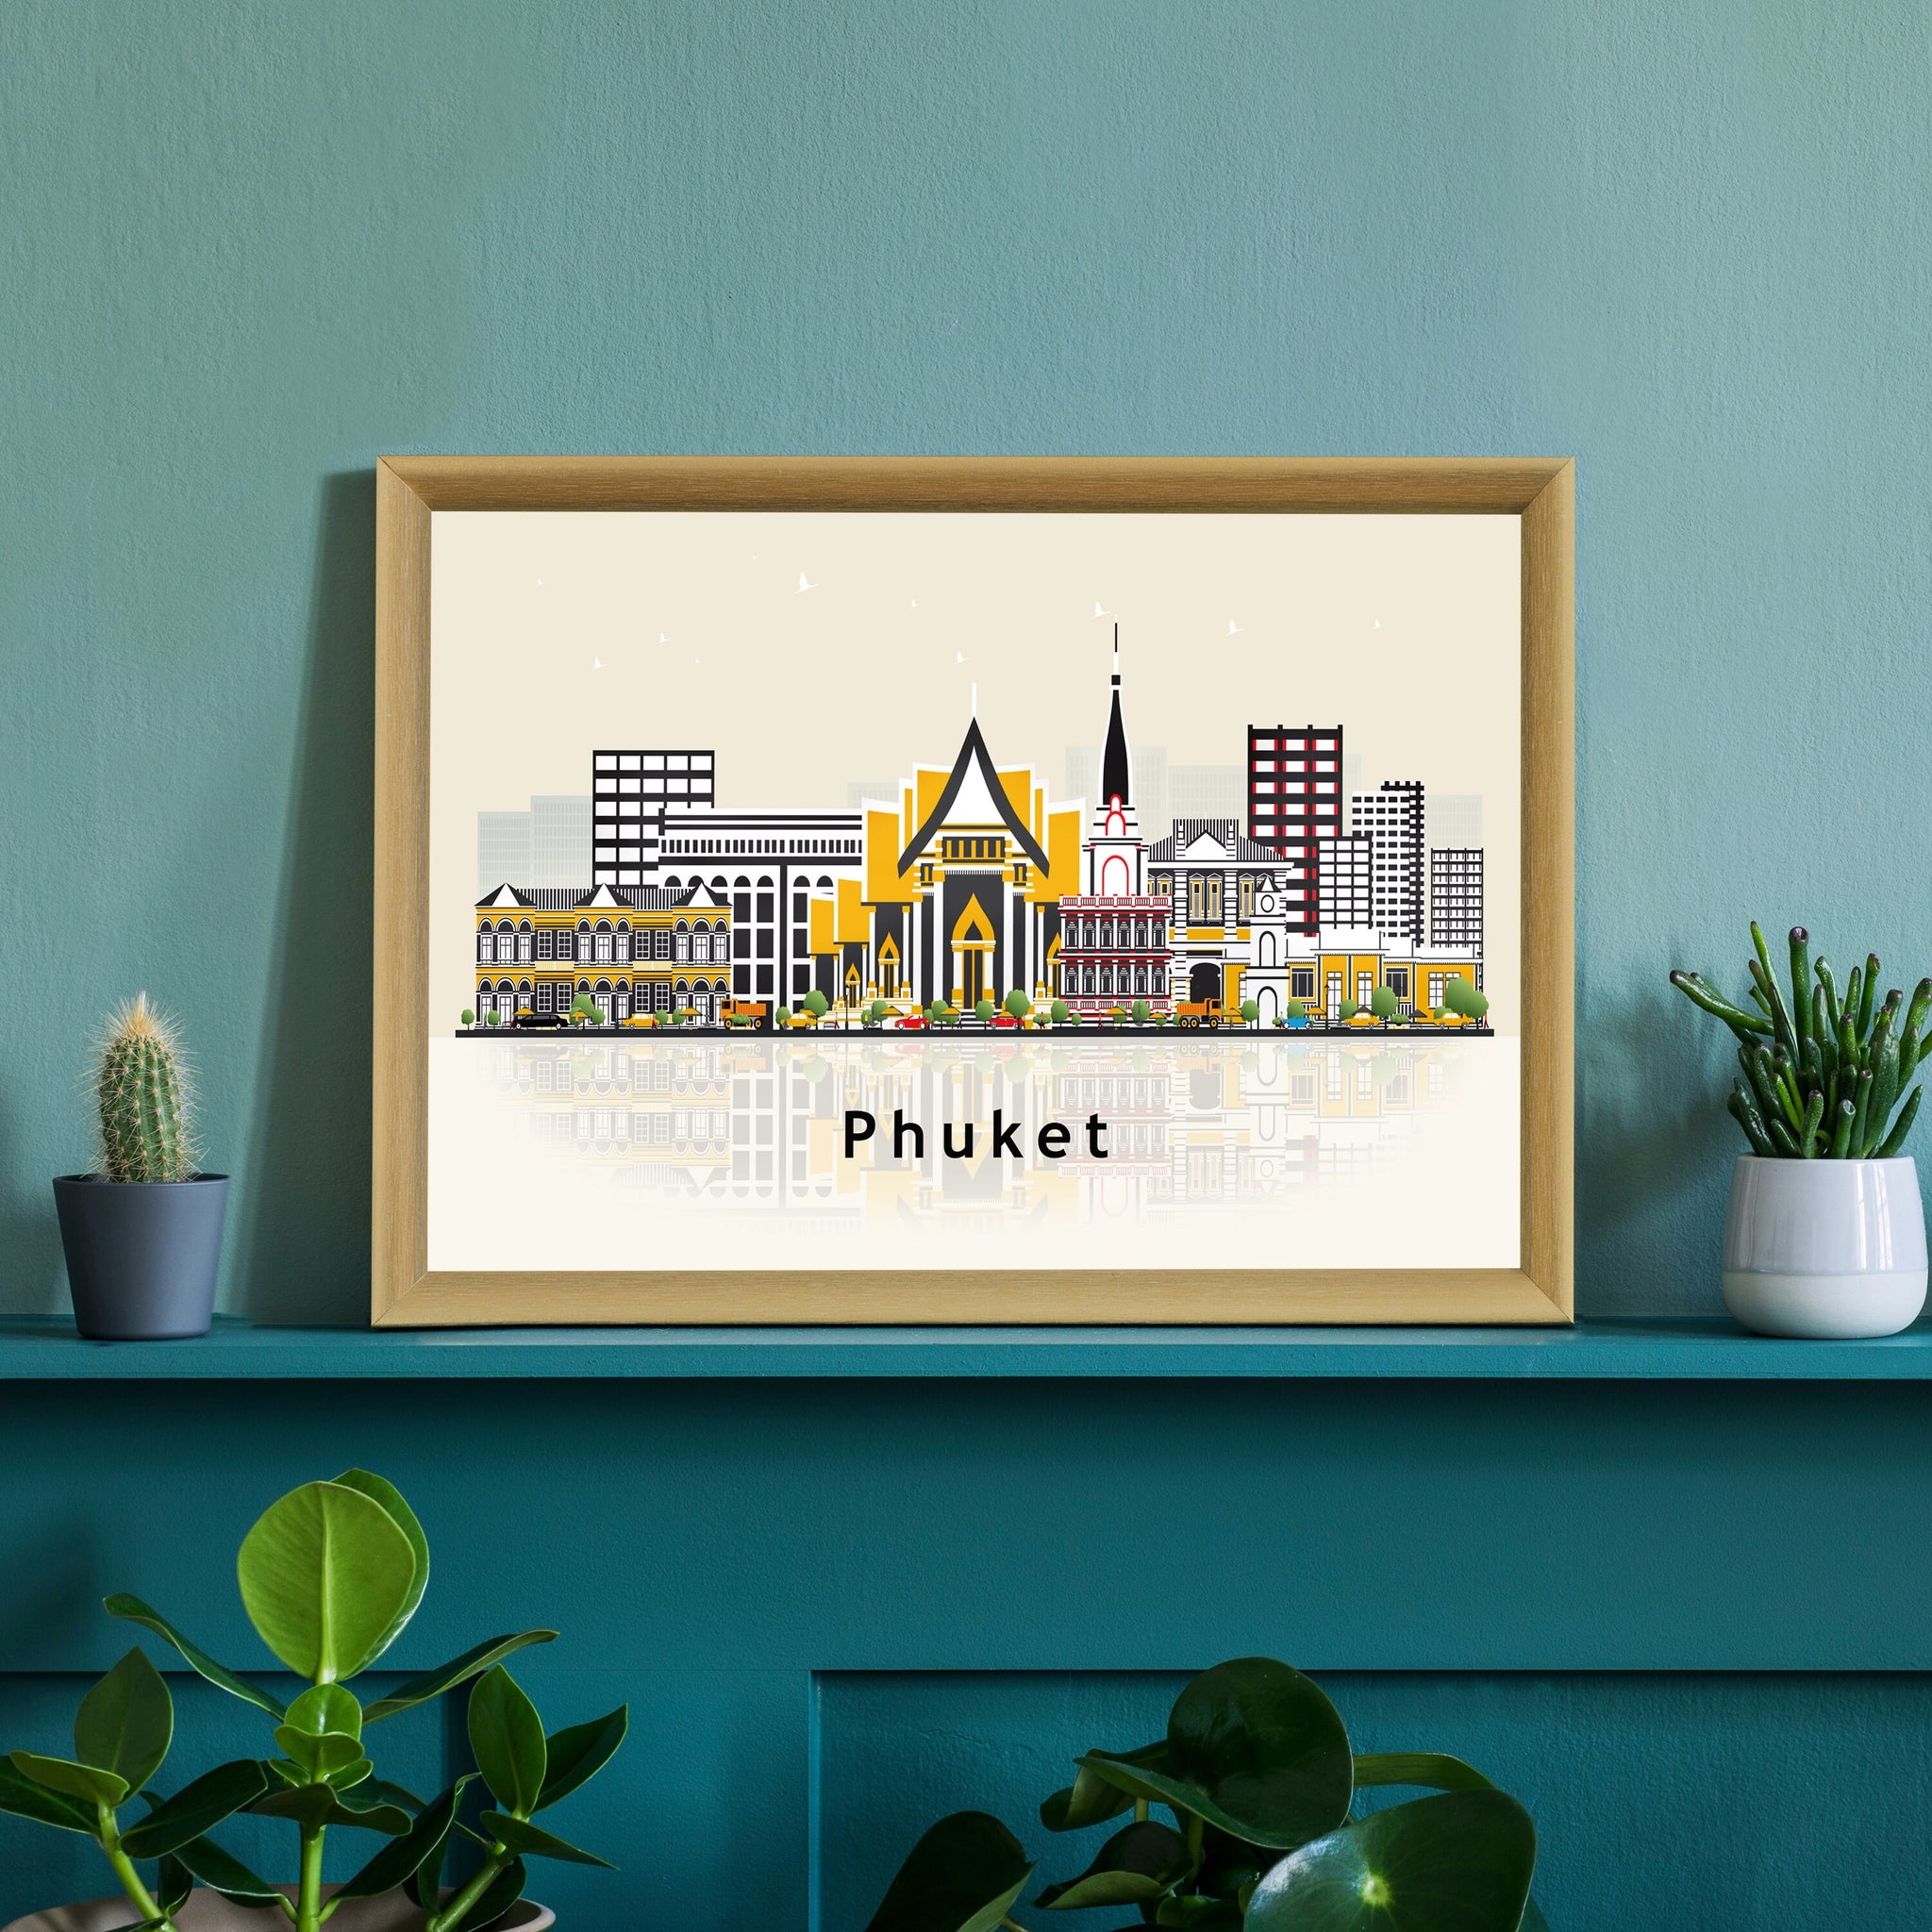 PHUKET THAILAND Illustration skyline poster, Modern skyline cityscape poster, City skyline landmark map poster, Home wall decorations